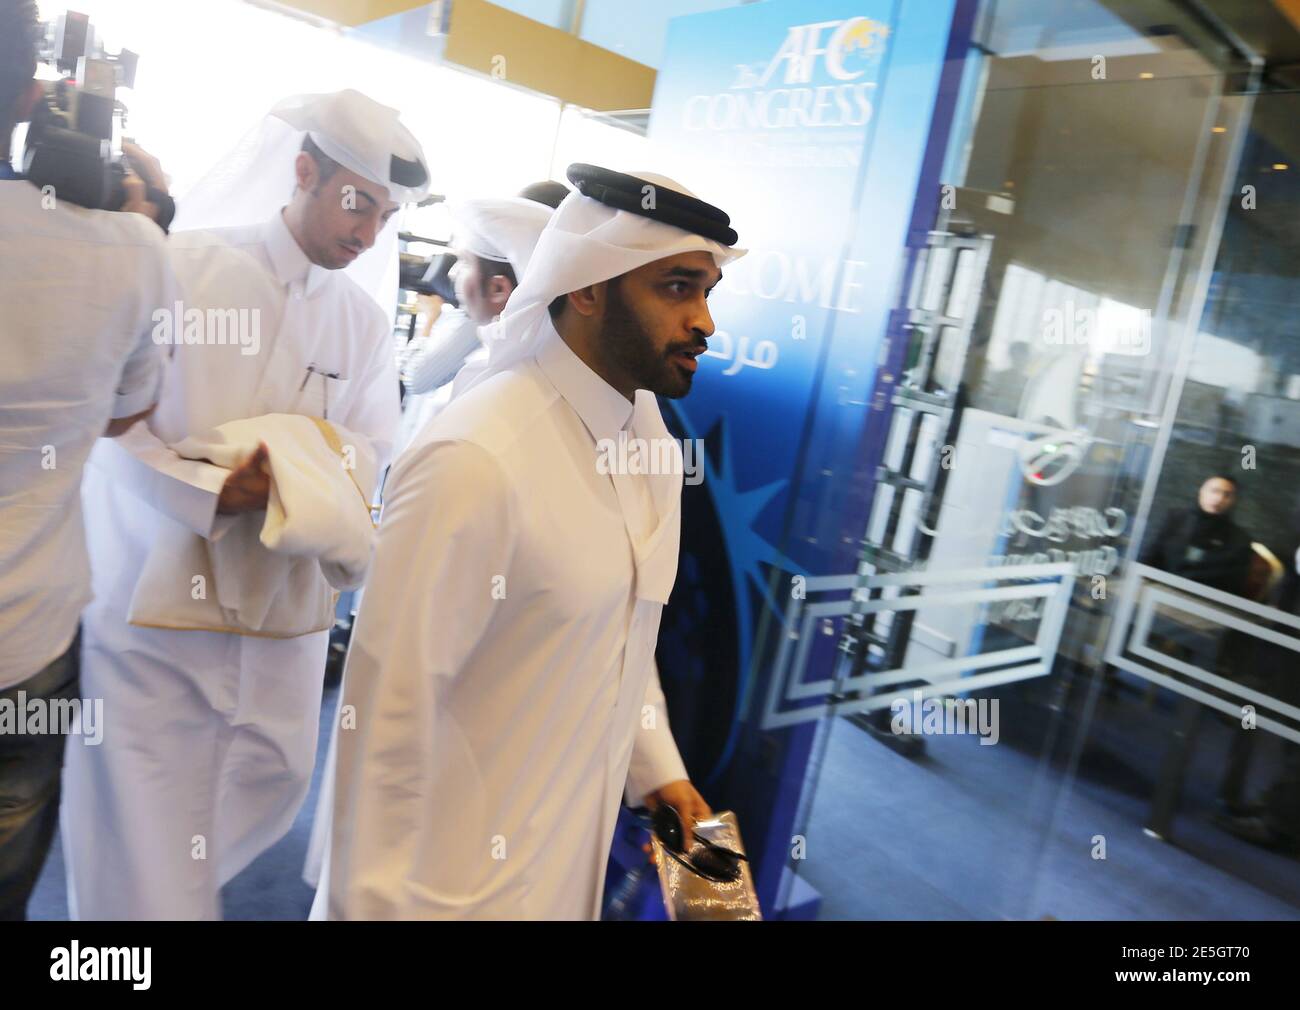 Hassan al-Thawadi, secretary-general of the Qatar 2022 Supreme Committee, arrives at the 26th Asian Football Confederation (AFC) Congress in Manama, Bahrain April 30, 2015. REUTERS/Hamad I Mohammed Stock Photo